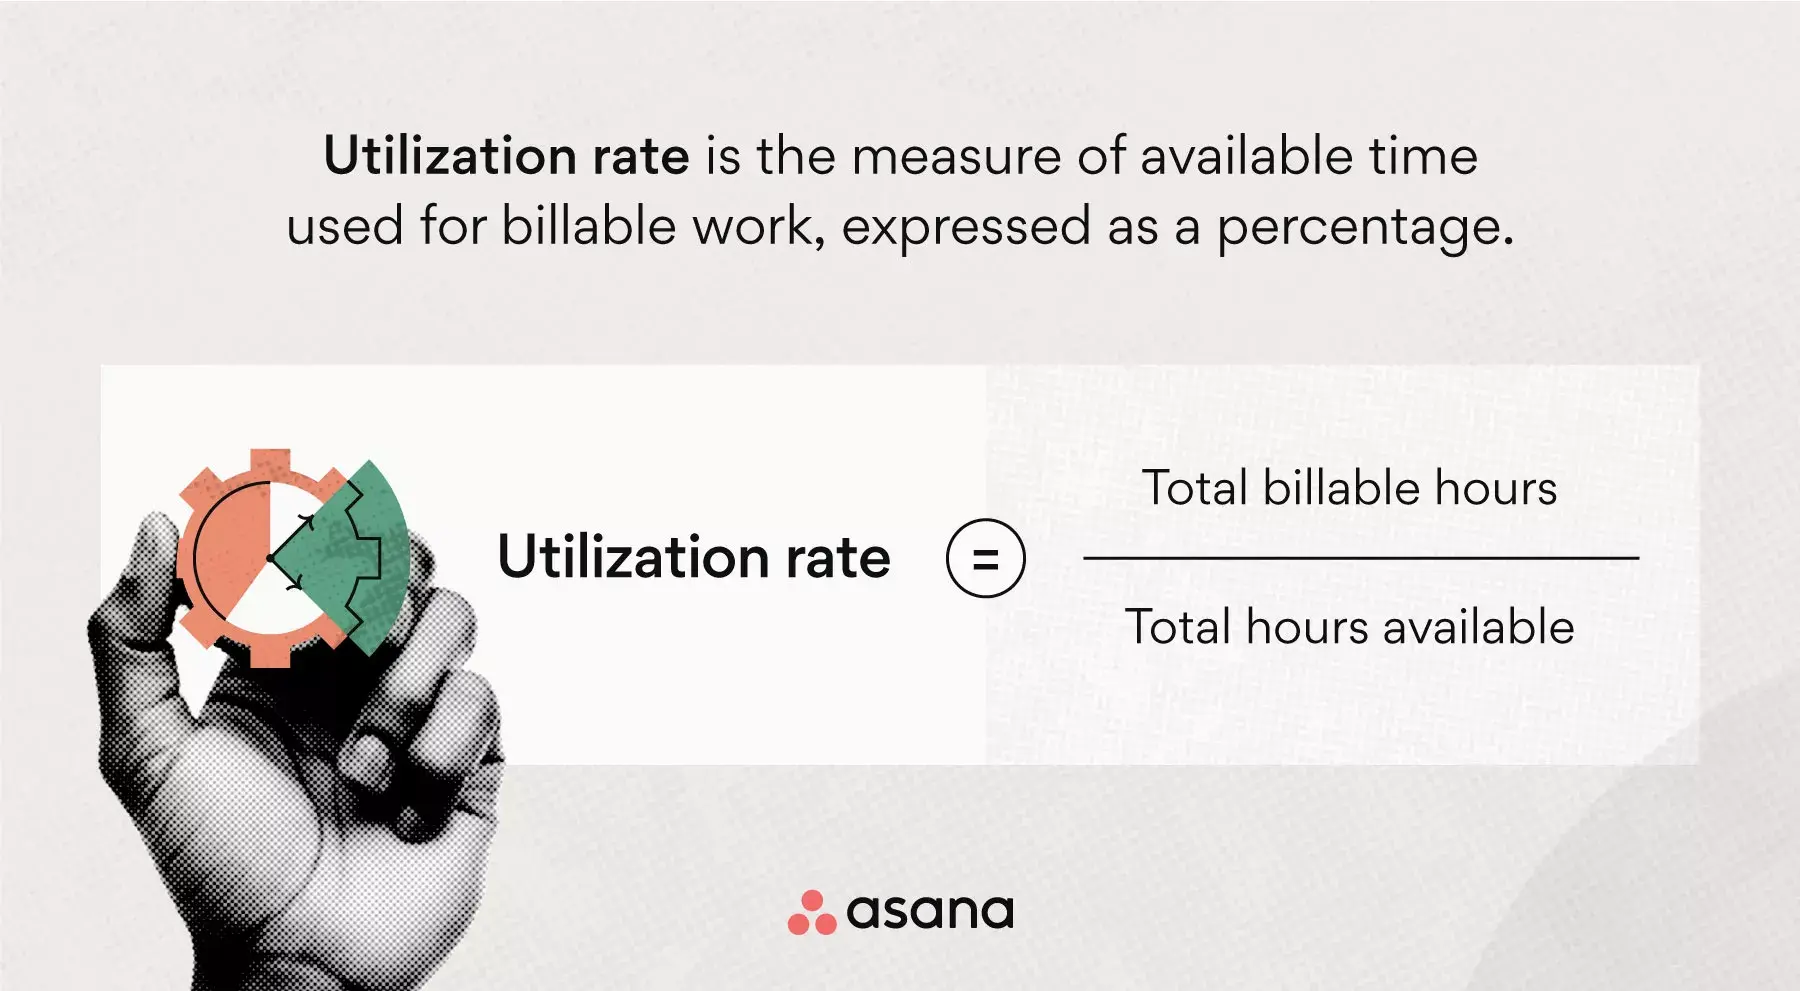 What is utilization rate?